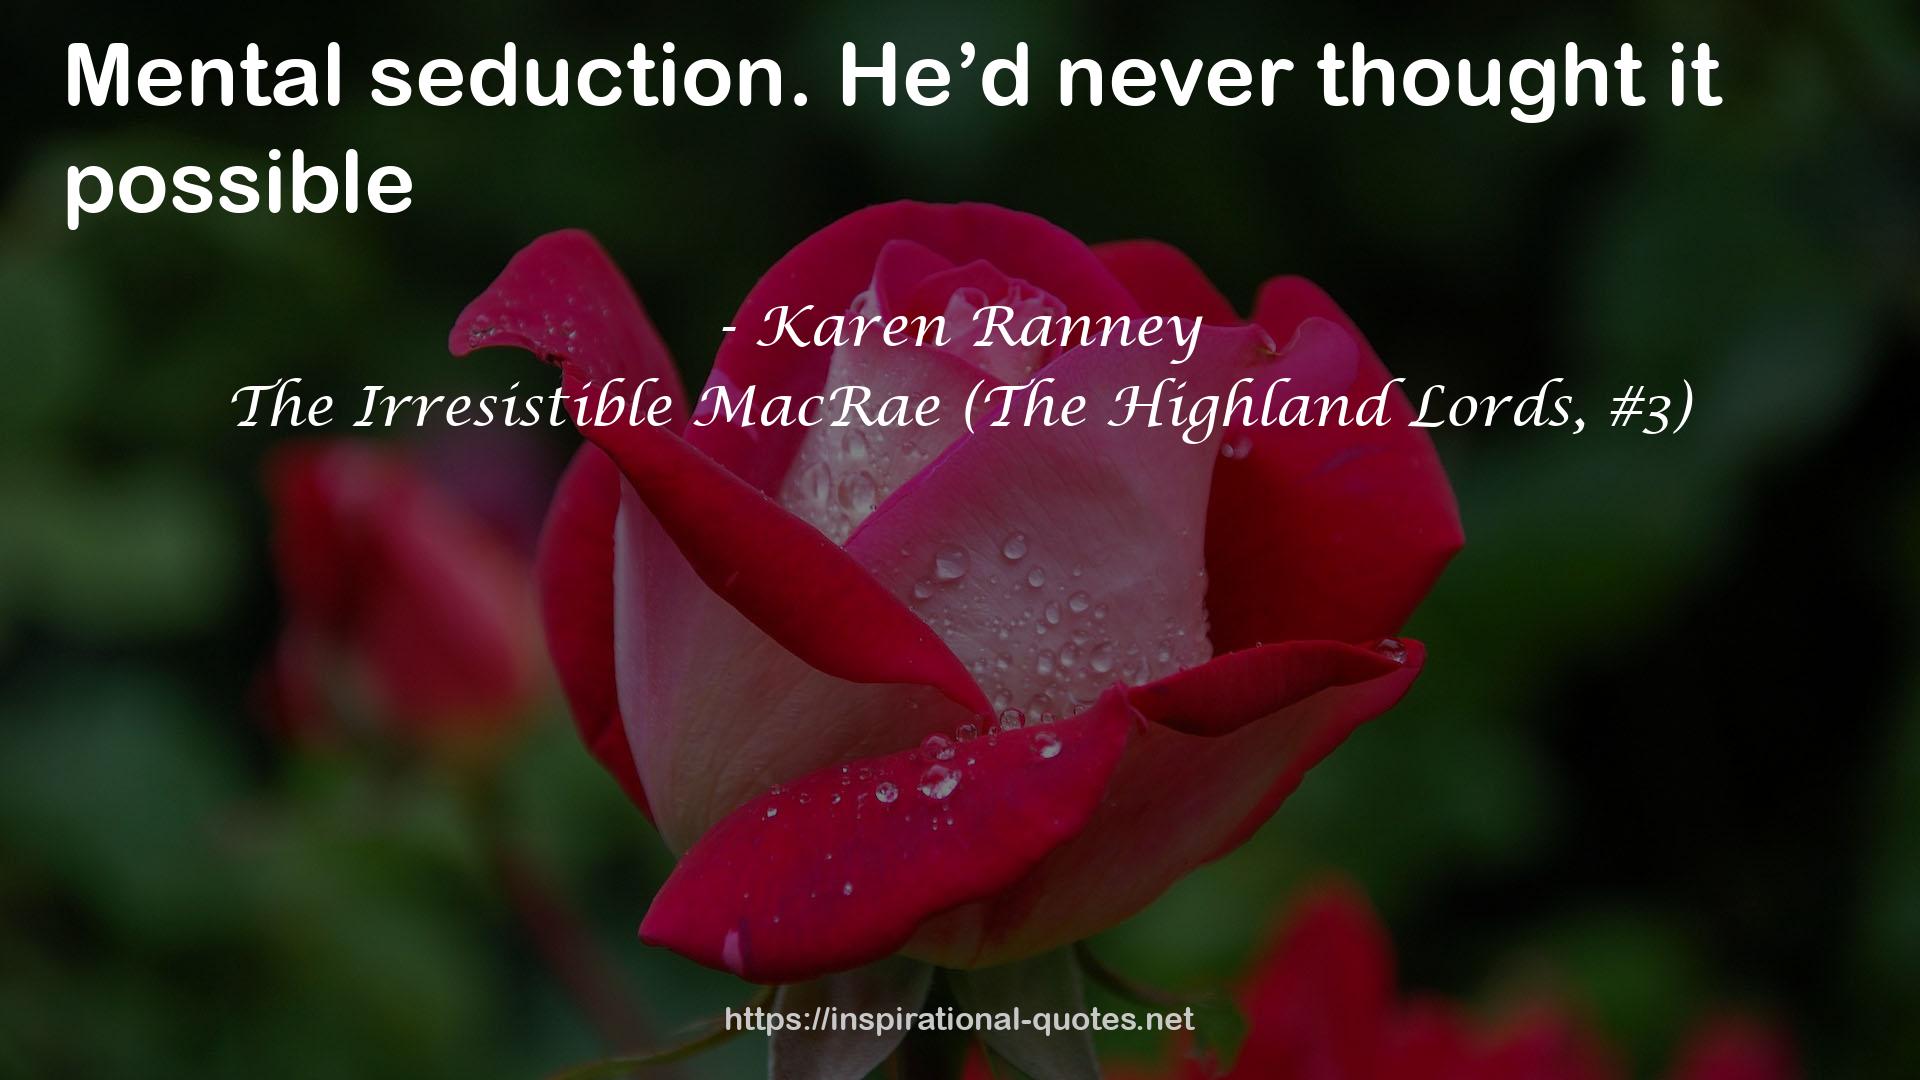 The Irresistible MacRae (The Highland Lords, #3) QUOTES